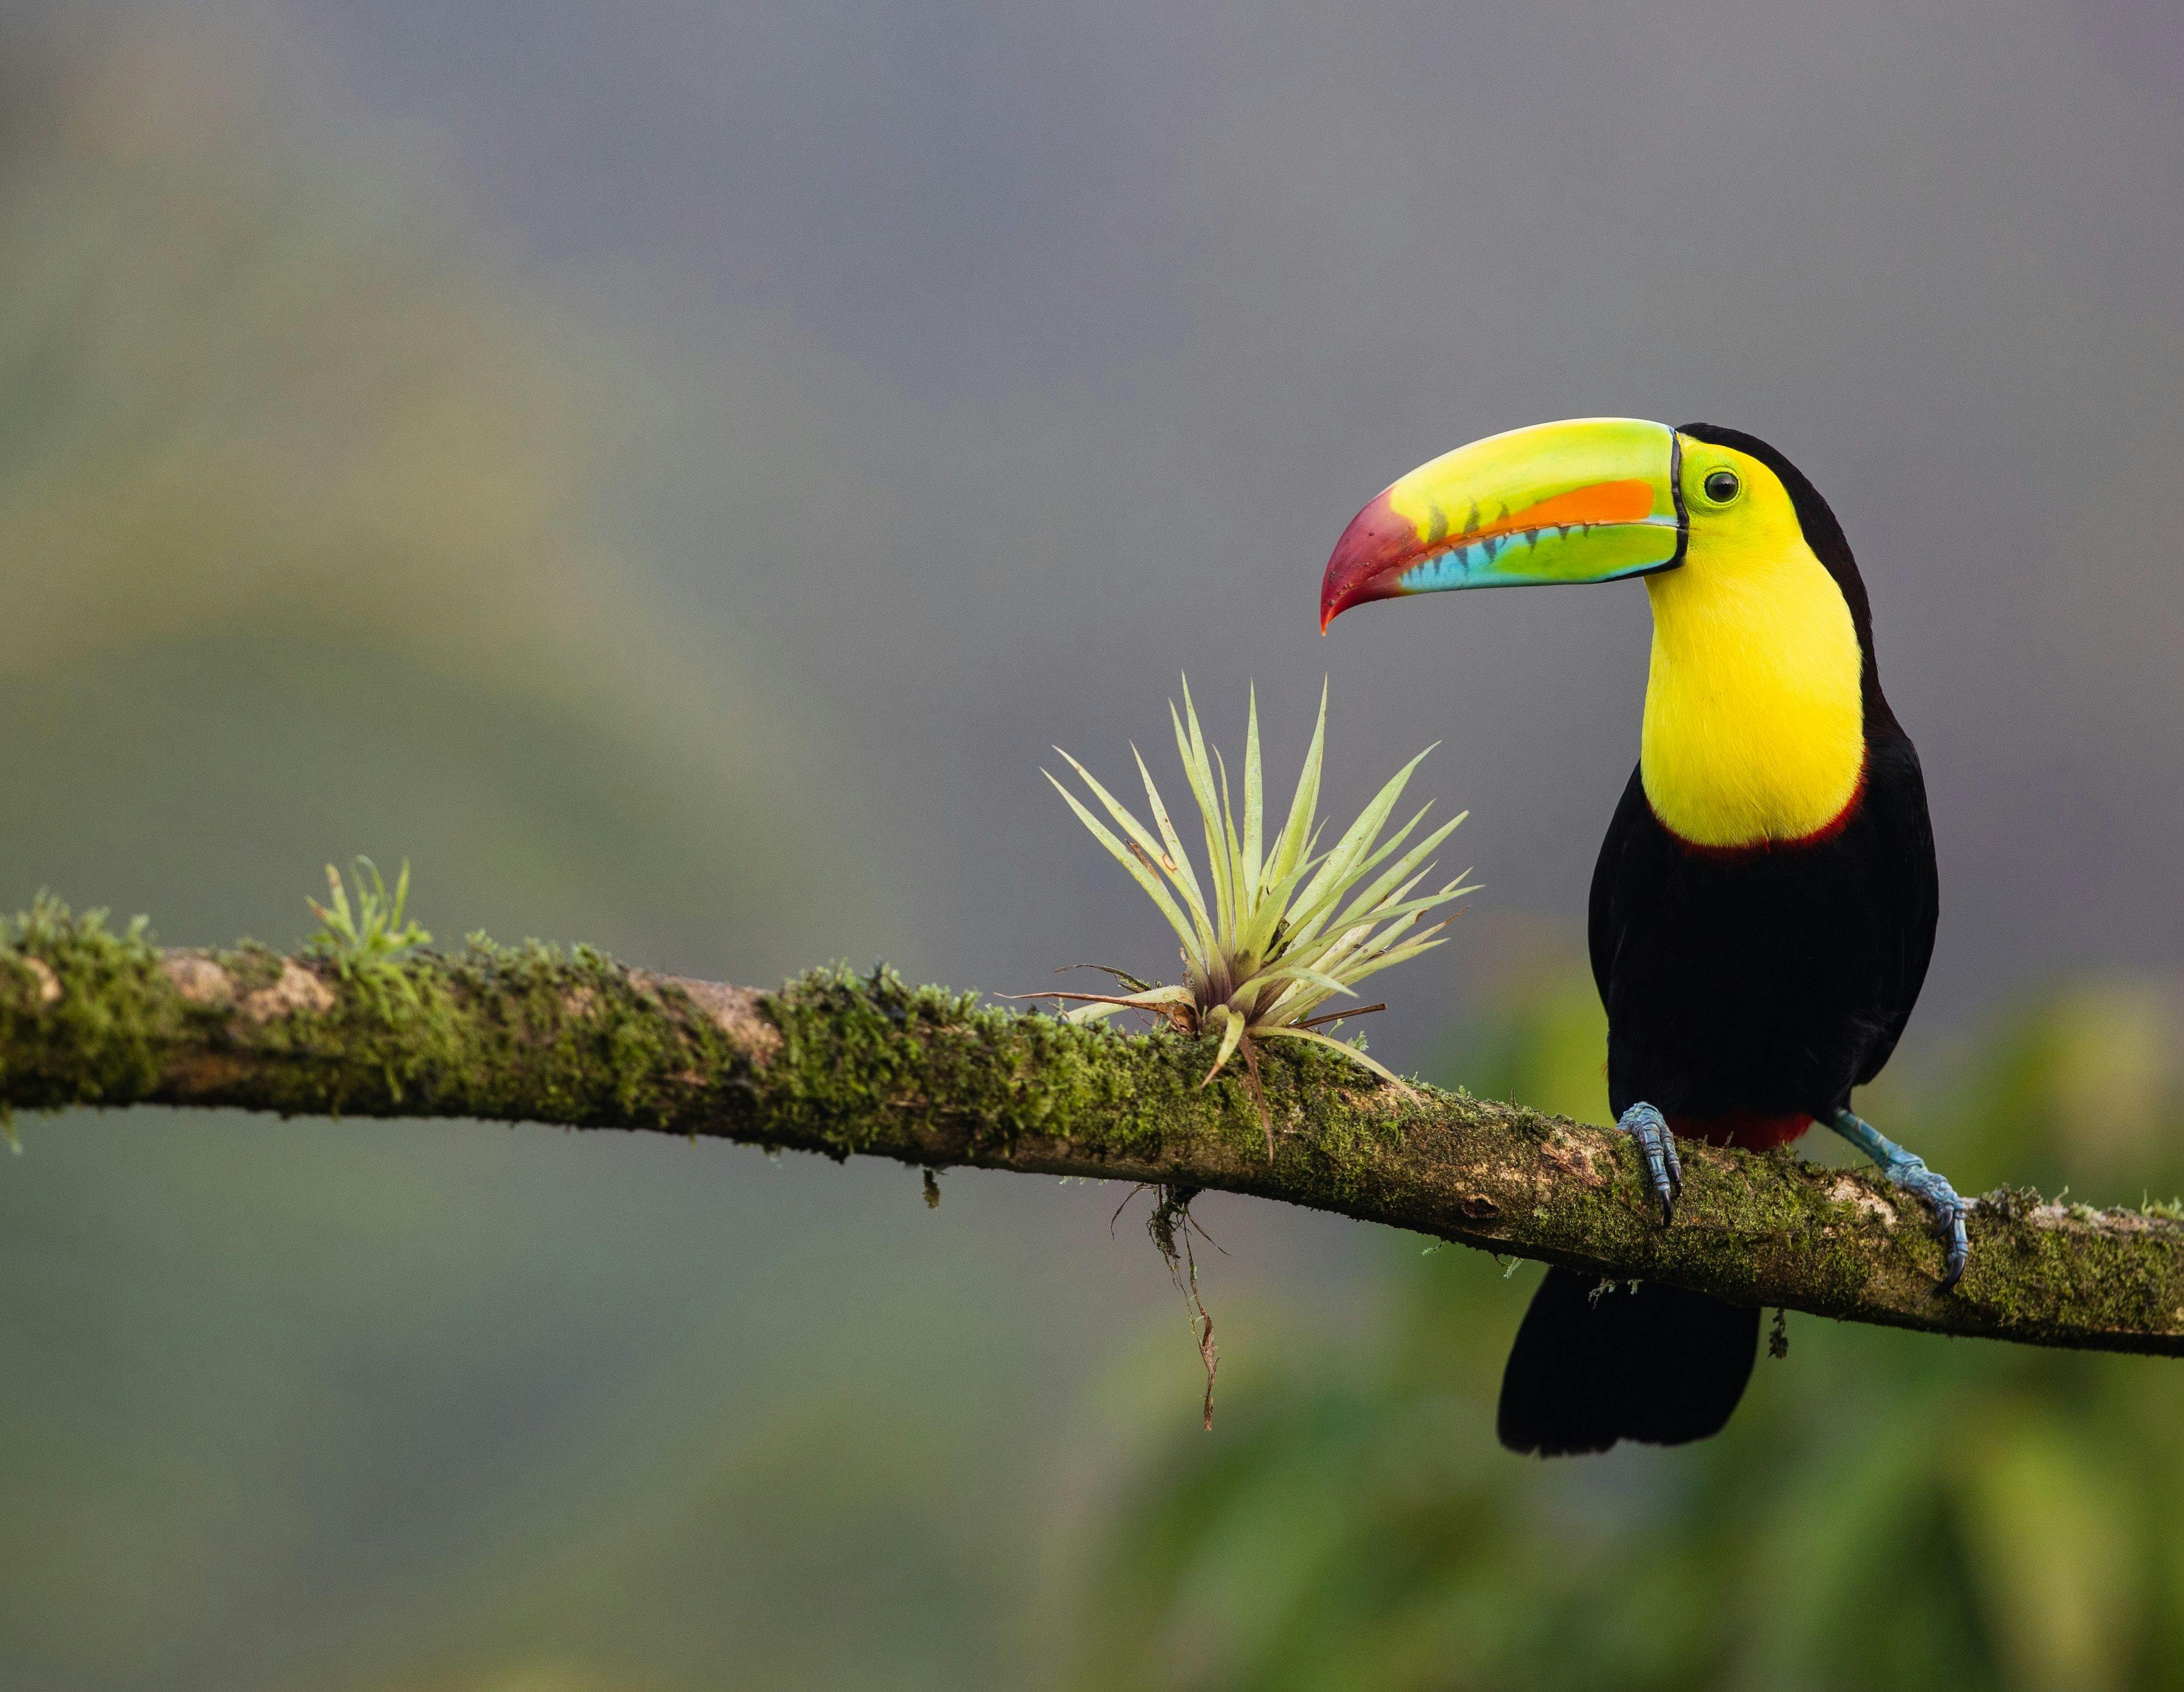 Keel-billed toucan sitting on a tree in Costa Rica.